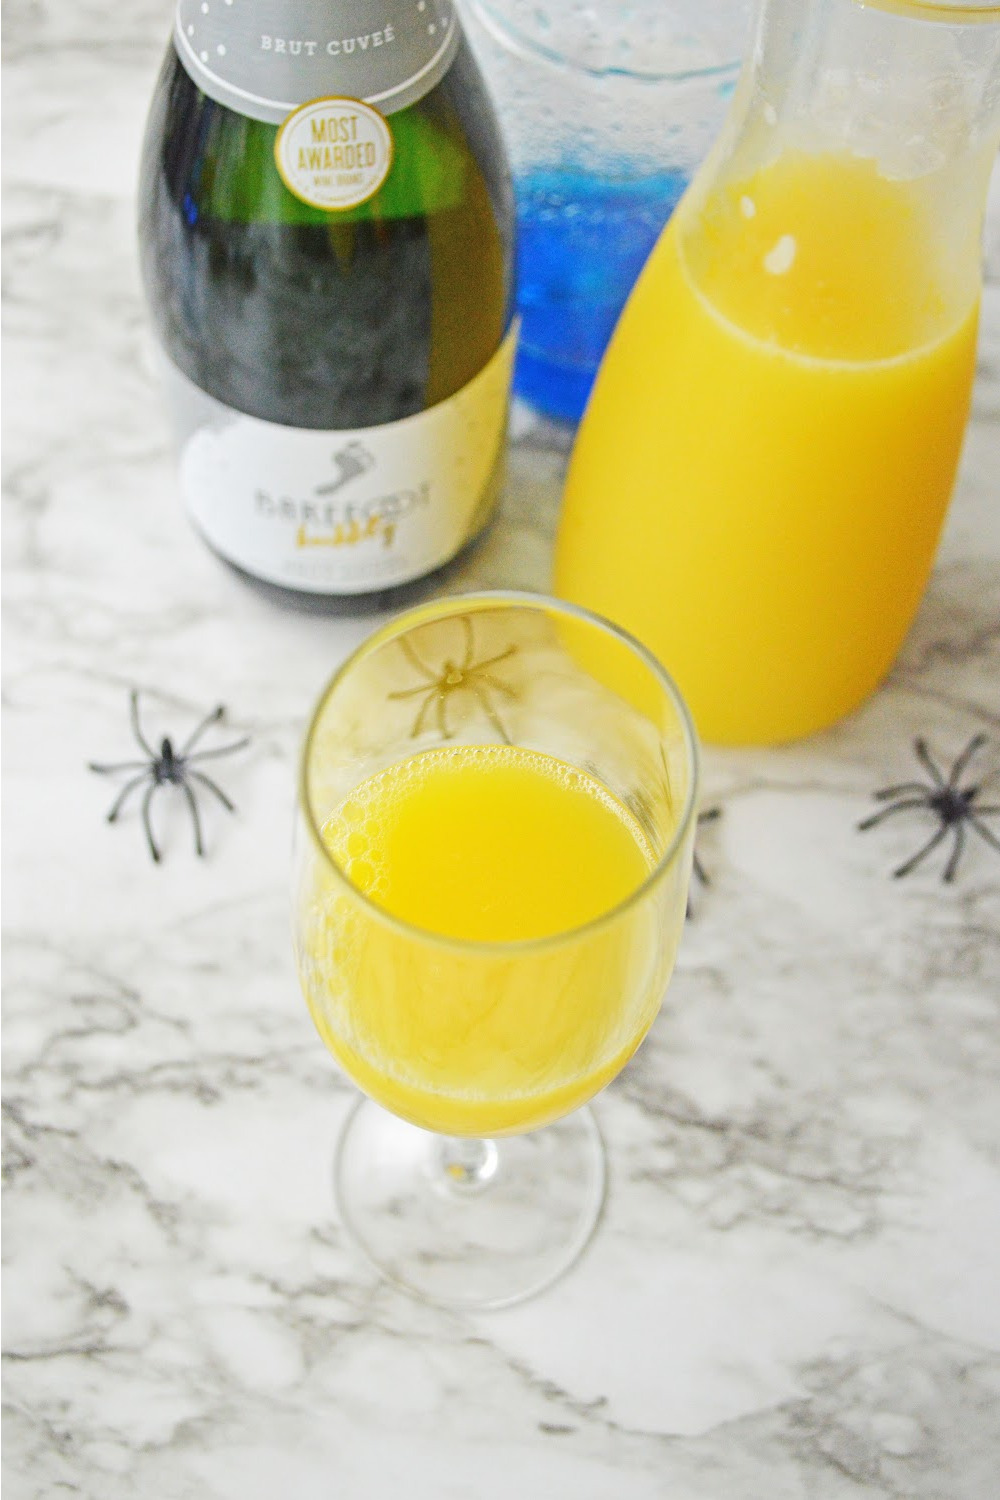 Orange juice in a glass for theseHalloween Mimosas ingredients include champagne, orange juice and blue Curacao. These ingredients are displayed on a gray and white marble background with black plastic spiders.